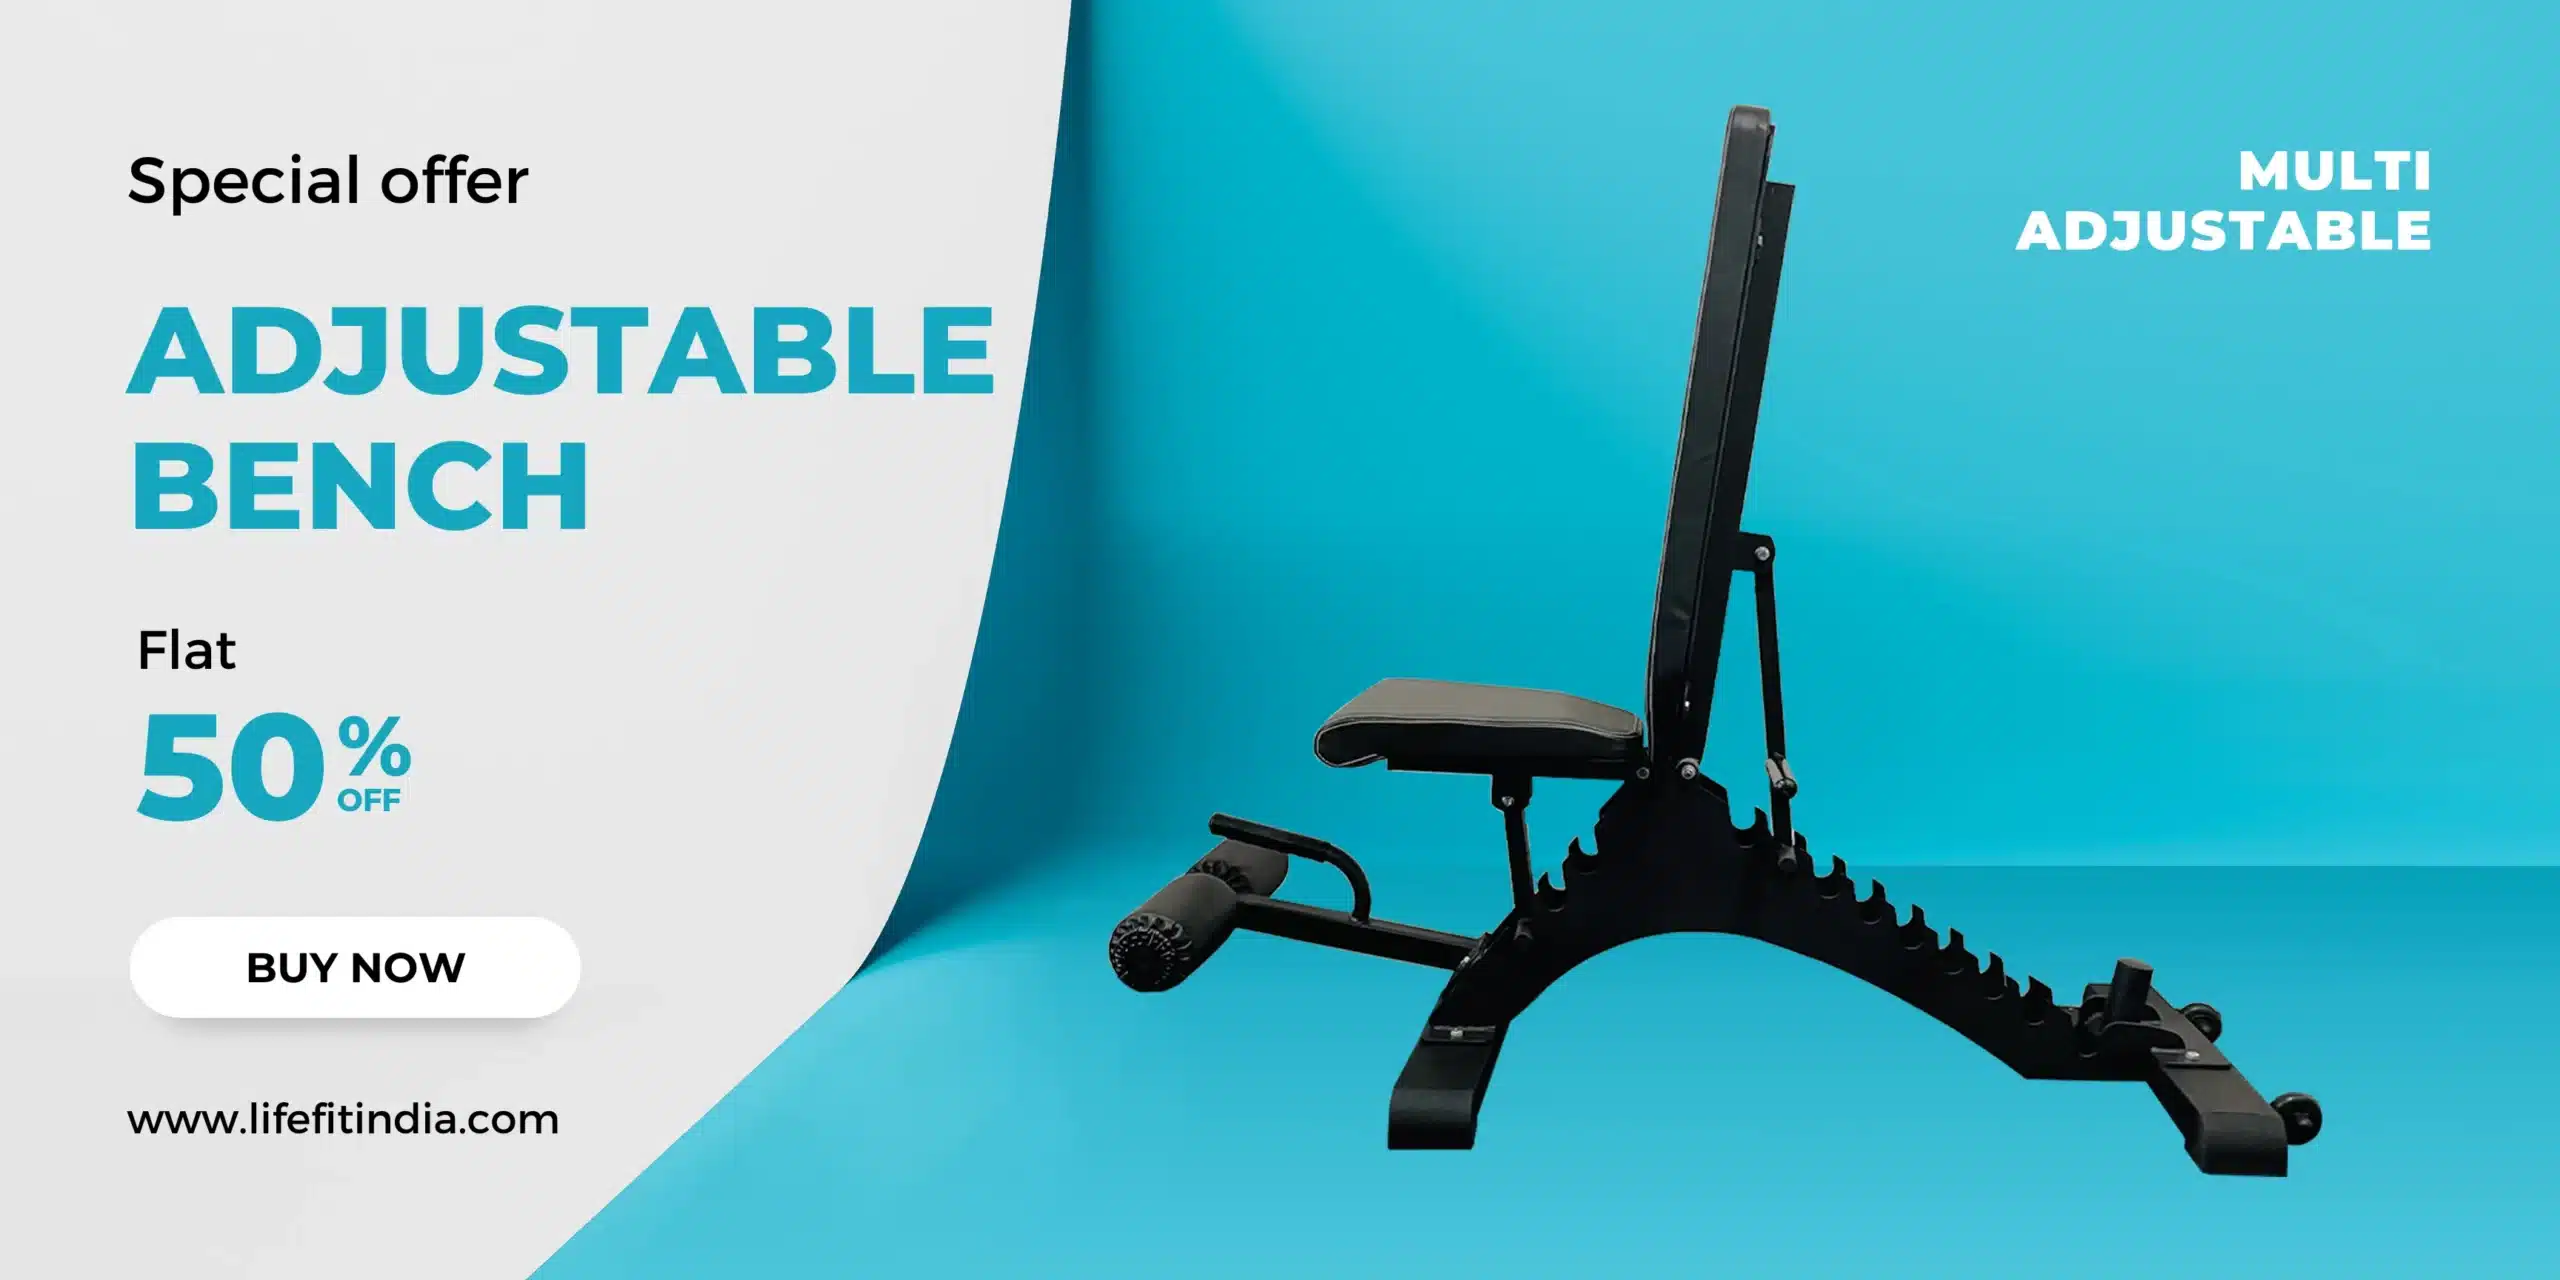 Transform your home gym experience with our Multi-Adjustable Gym Bench, the ultimate solution for your bench press and strength training needs.